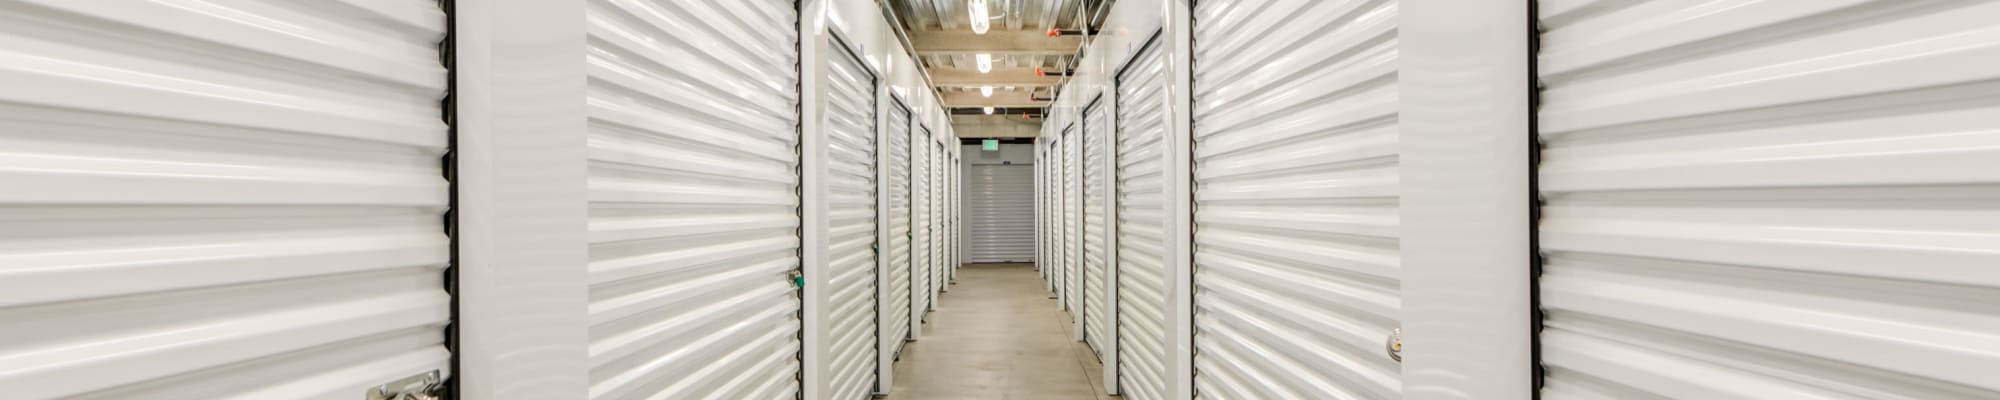 Reviews of self storage in Chatsworth CA